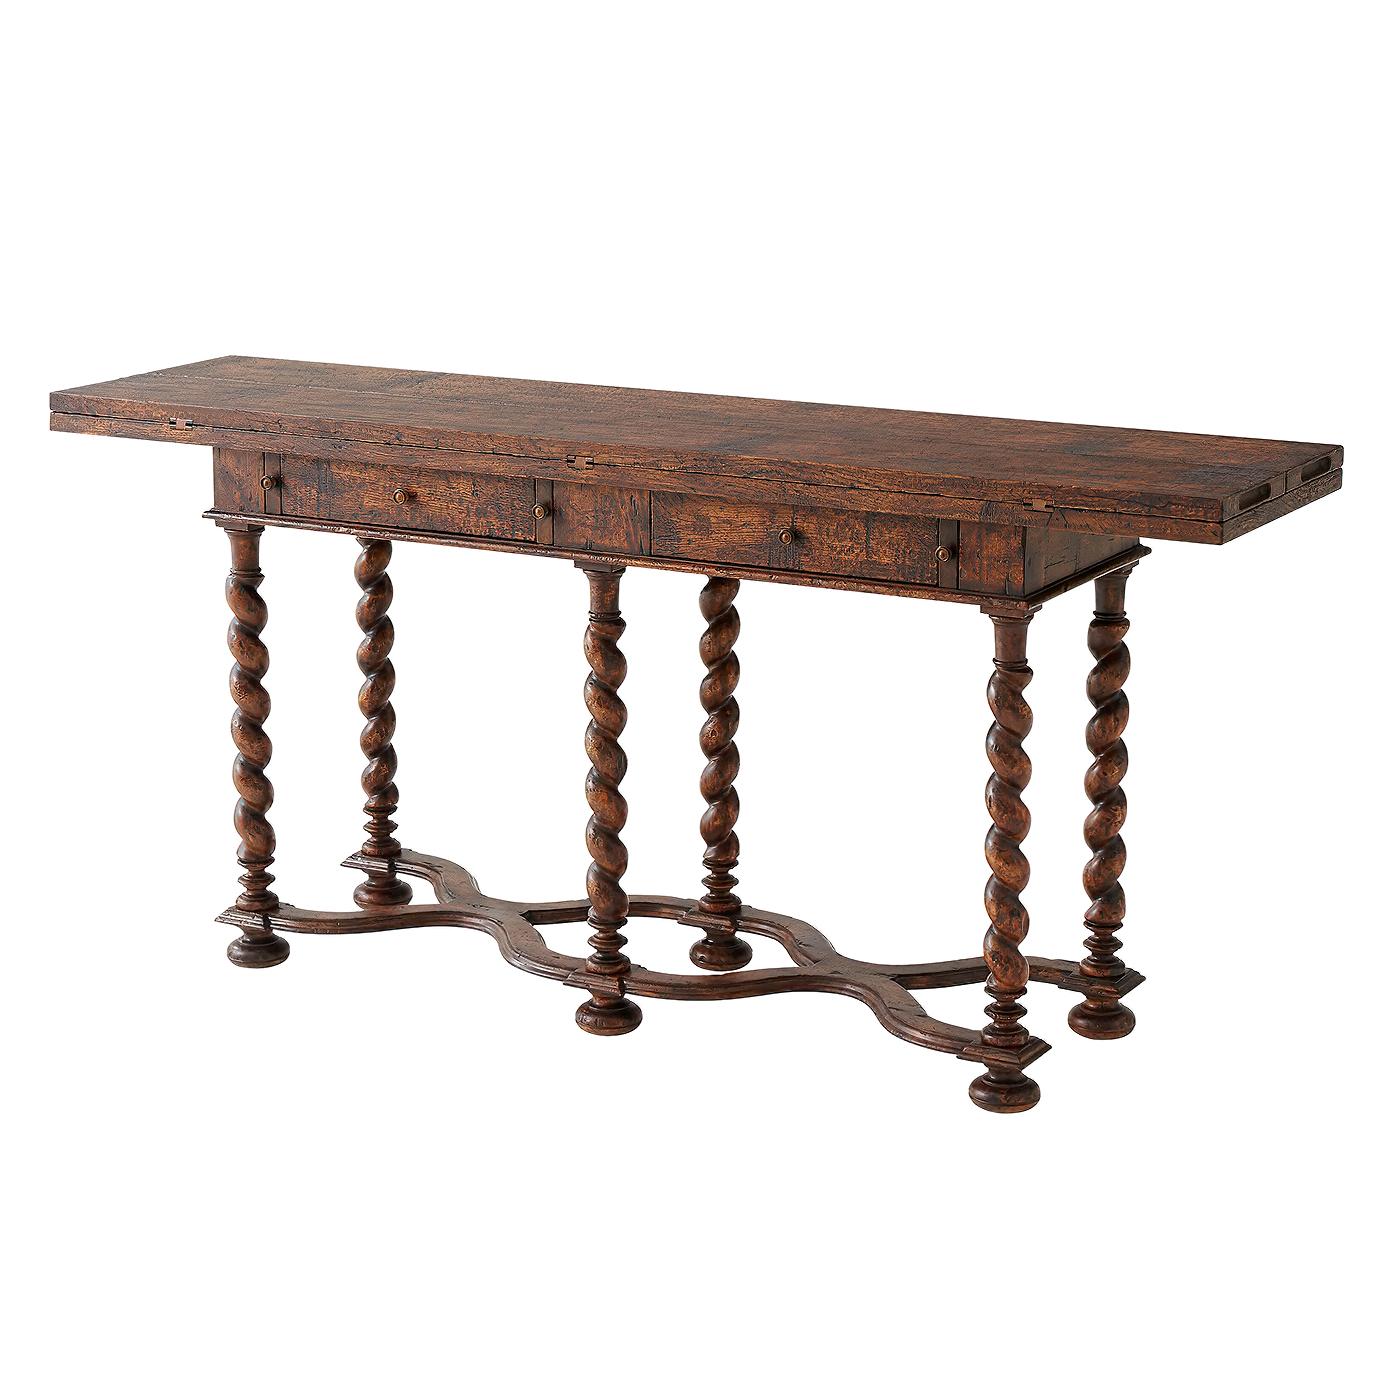 A mahogany and reclaimed oak serving or 'Hunt Table', the rectangular top with two-fold-down leaves resting on lopers pulling from the apron, with two frieze drawers, on spiral turned legs with bun feet joined by wavy 'X'